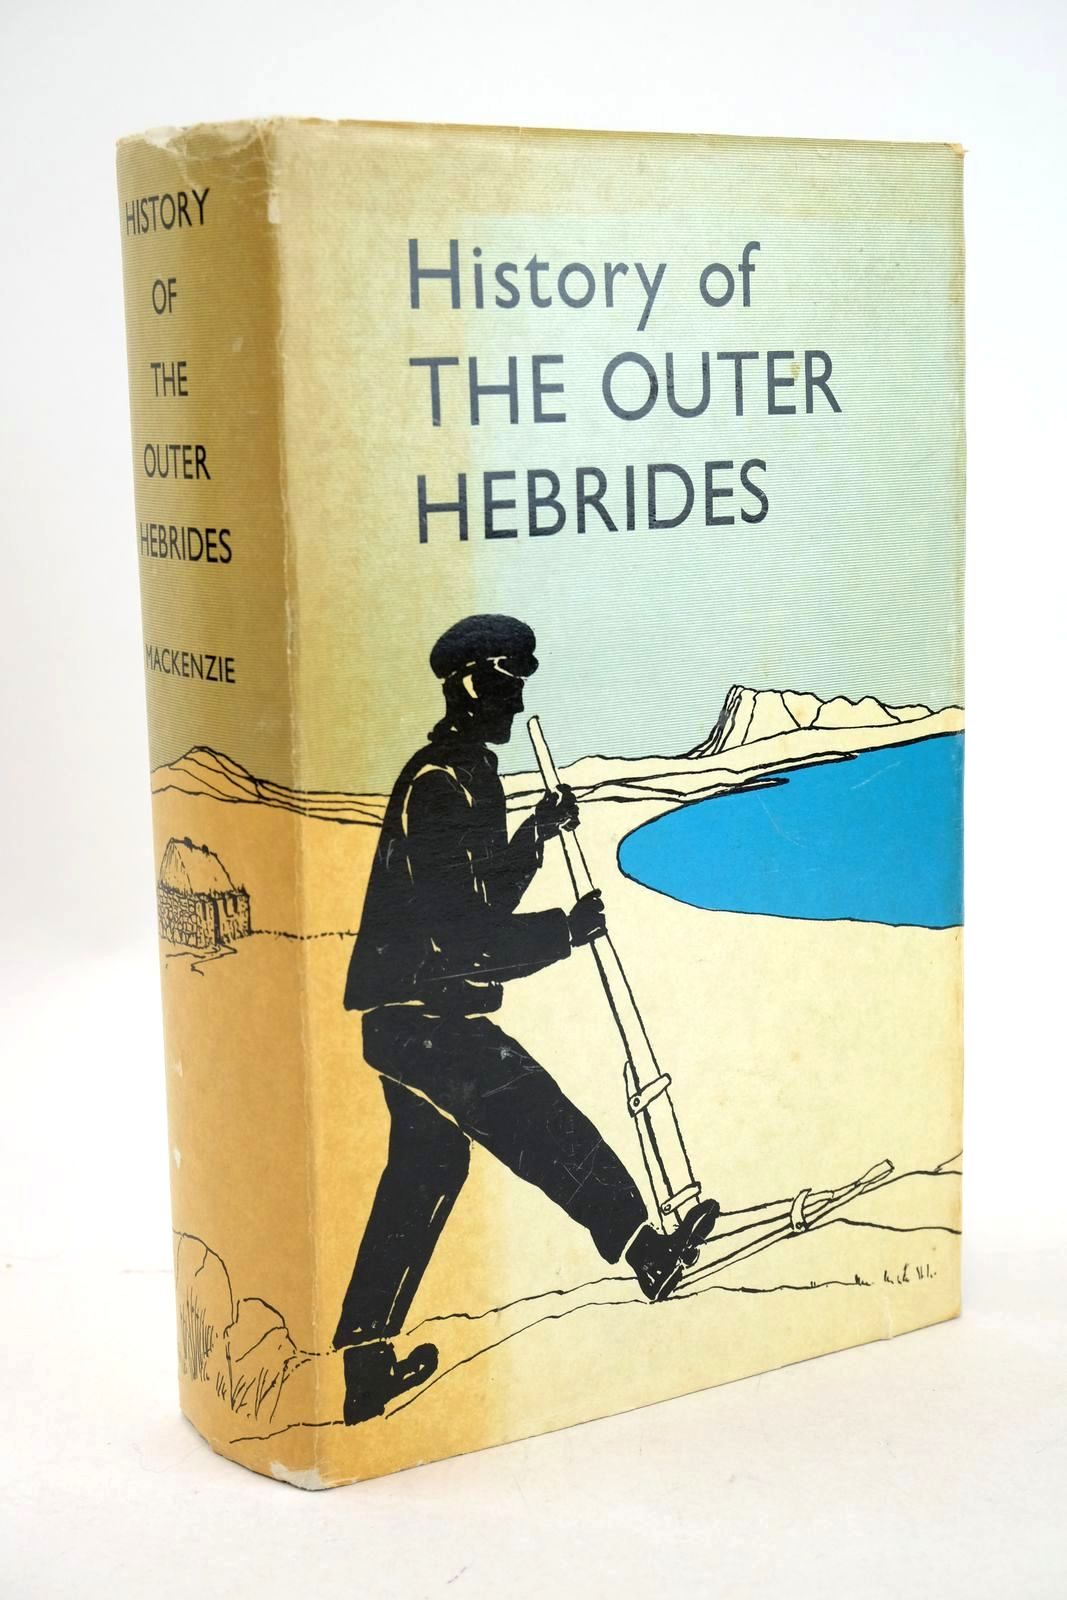 Photo of HISTORY OF THE OUTER HEBRIDES written by Mackenzie, W.C. published by James Thin, The Mercat Press (STOCK CODE: 1326574)  for sale by Stella & Rose's Books